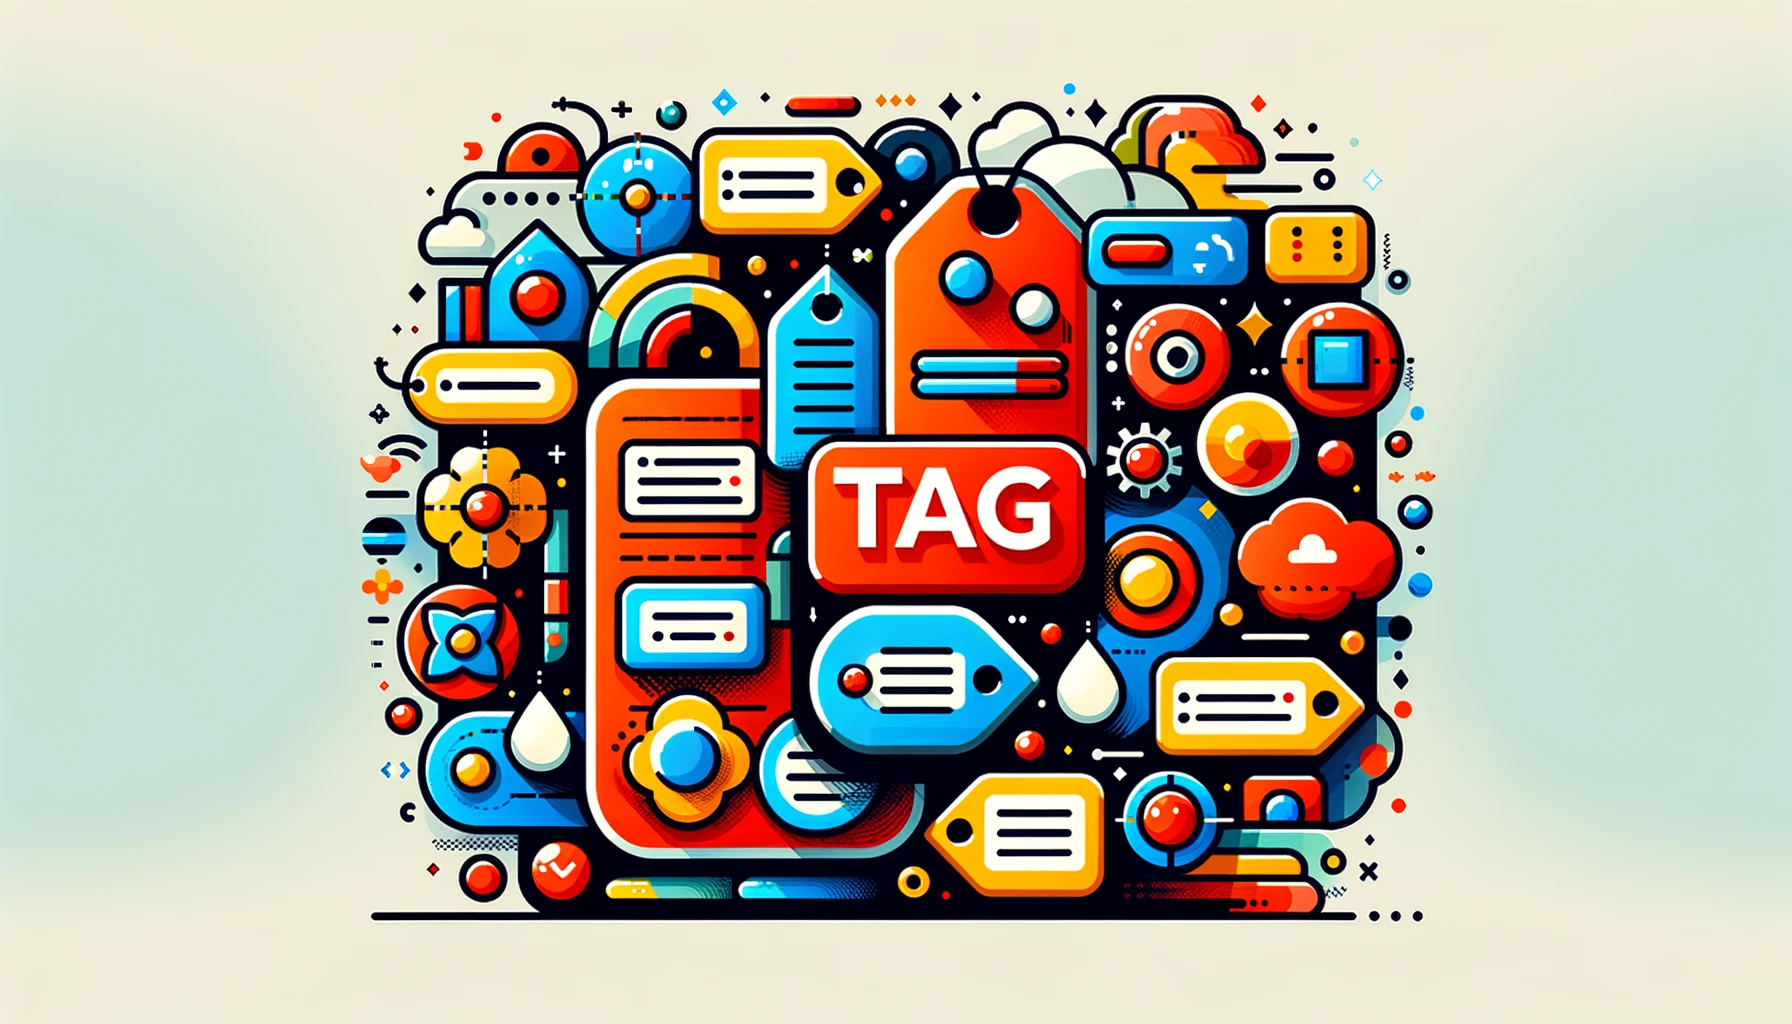 Colorful-Array-of-Tags-and-Web-Development-Icons-Displaying-Content-Management-Concepts-Interactive-Design-Elements